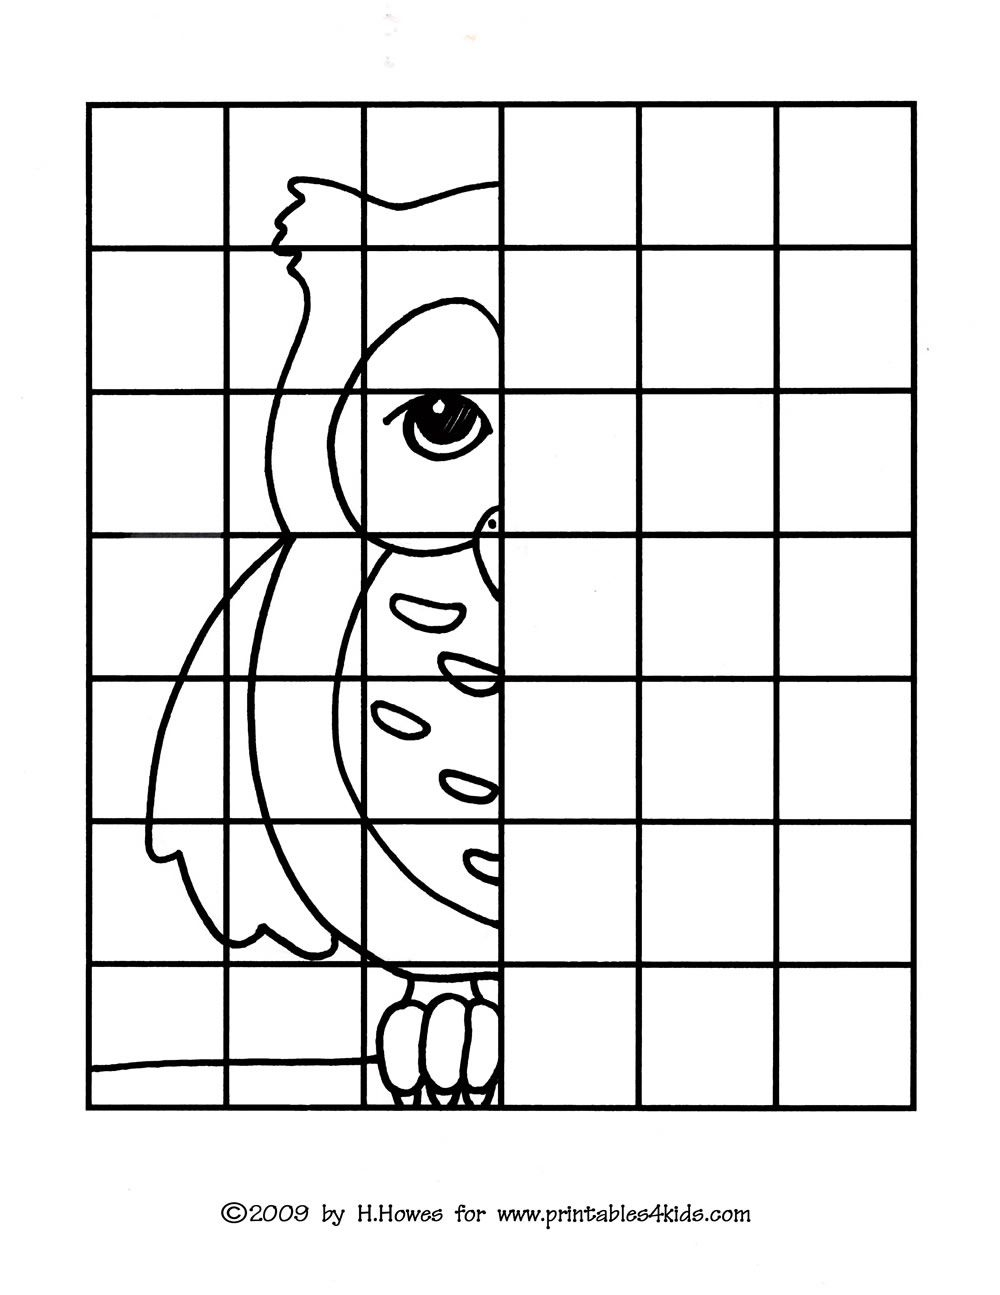 15 Drawing Worksheets Owl For Free Download On Ayoqq - Free Printable Drawing Worksheets